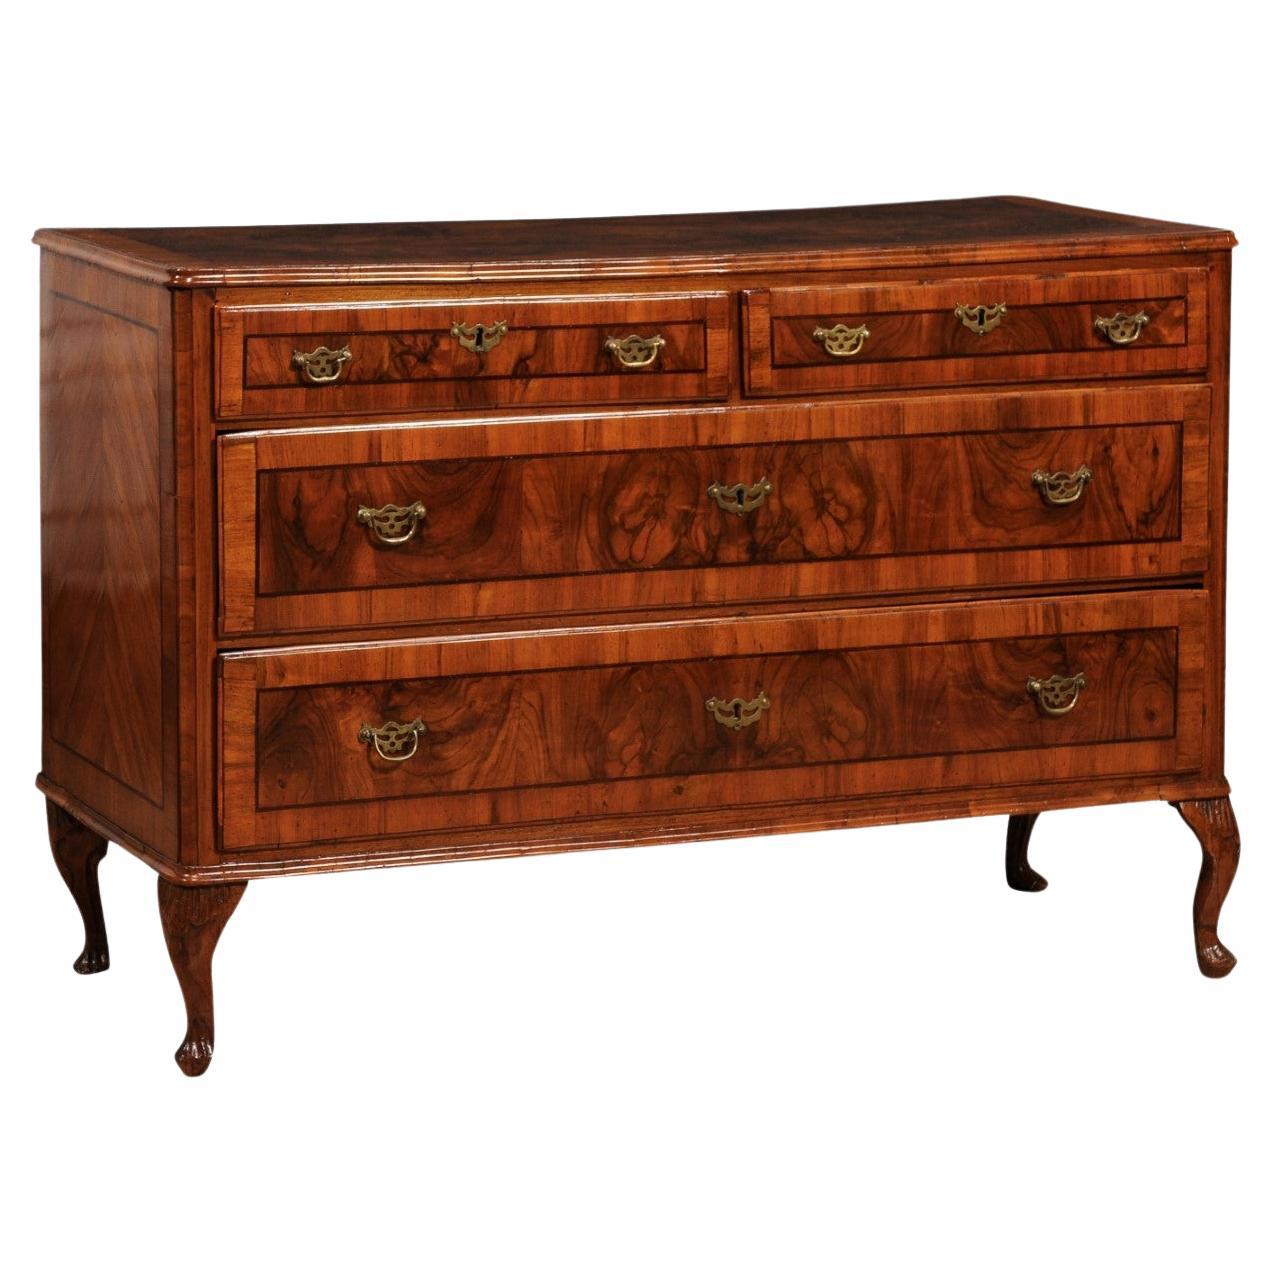 18th Century Venetian Walnut ad Mahogany Commode with Bookmatched Veneer For Sale